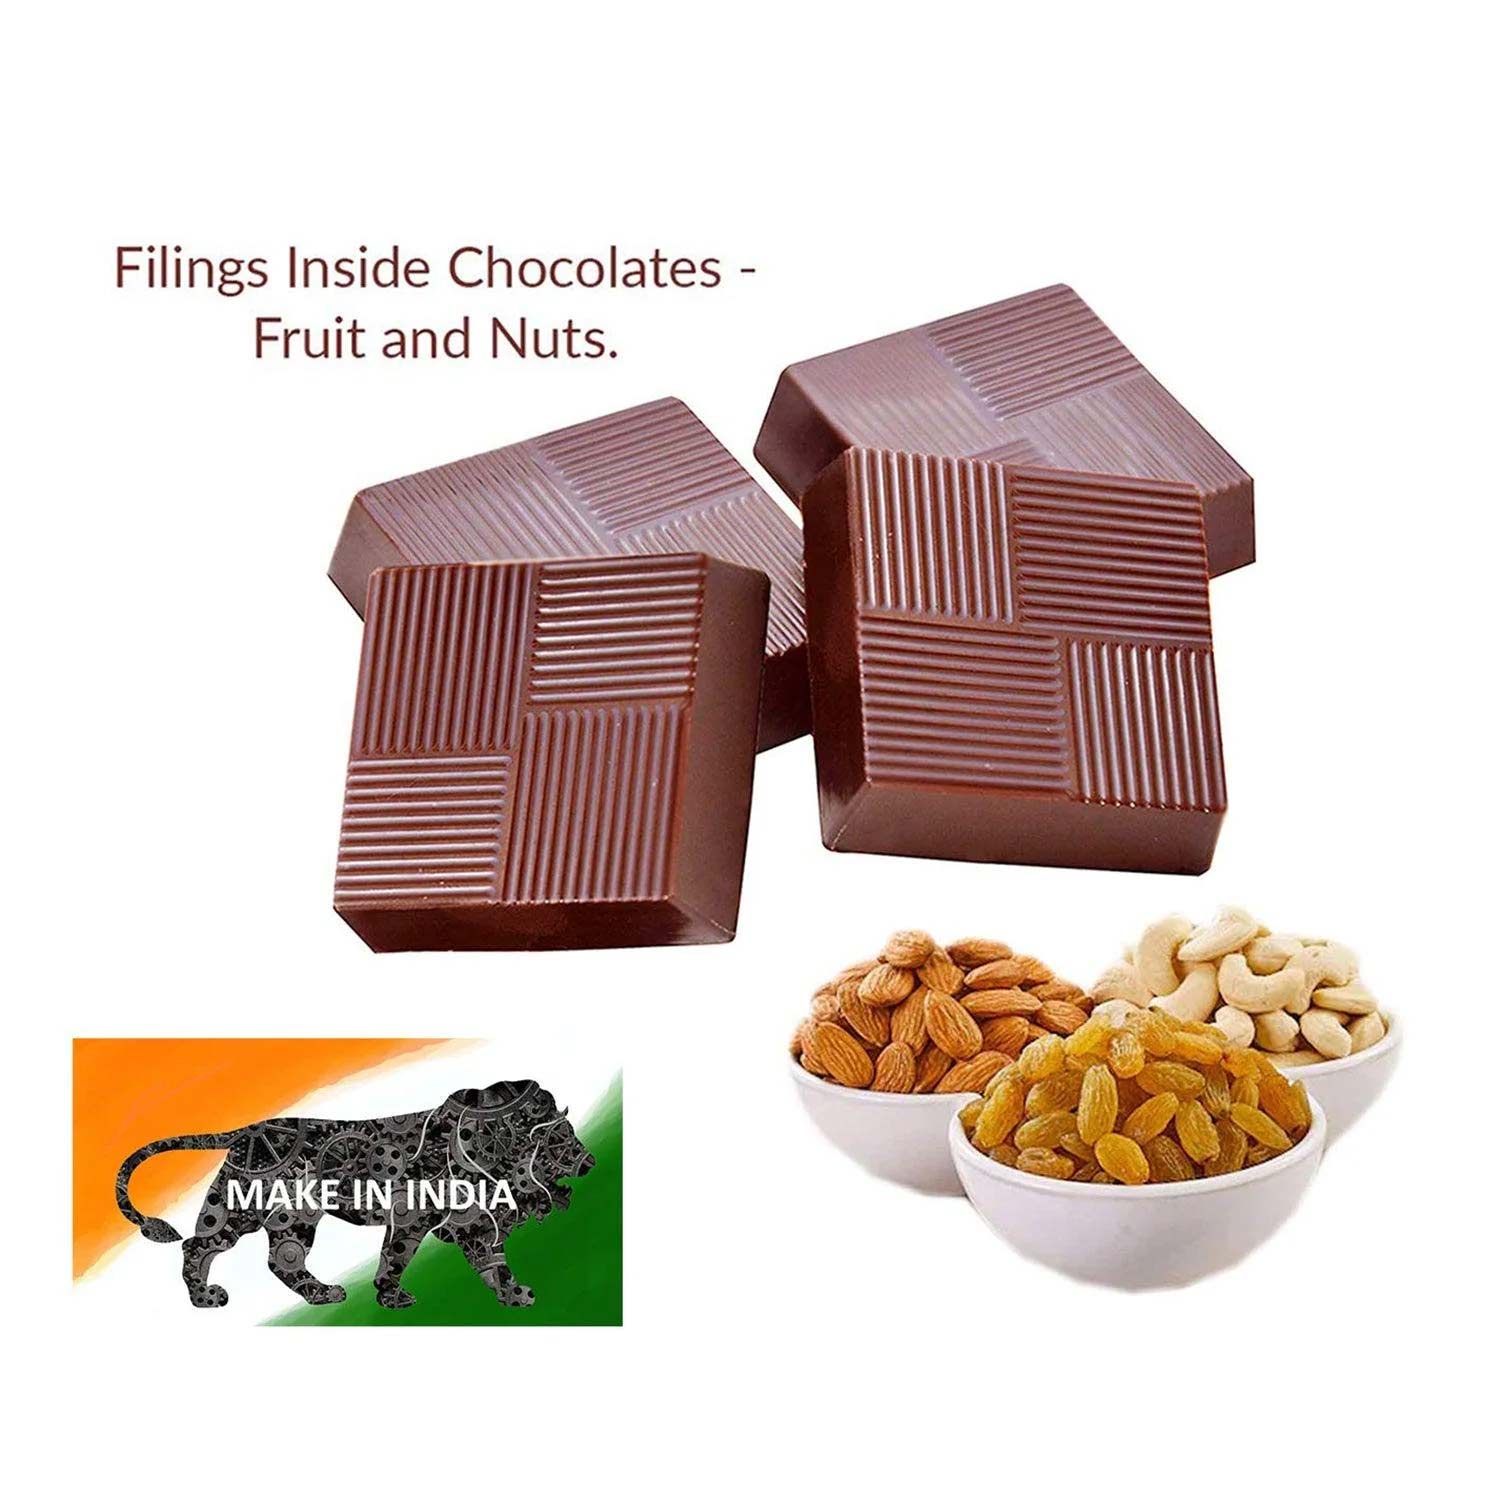 Happy Father's Day printed wrapped chocolates gift